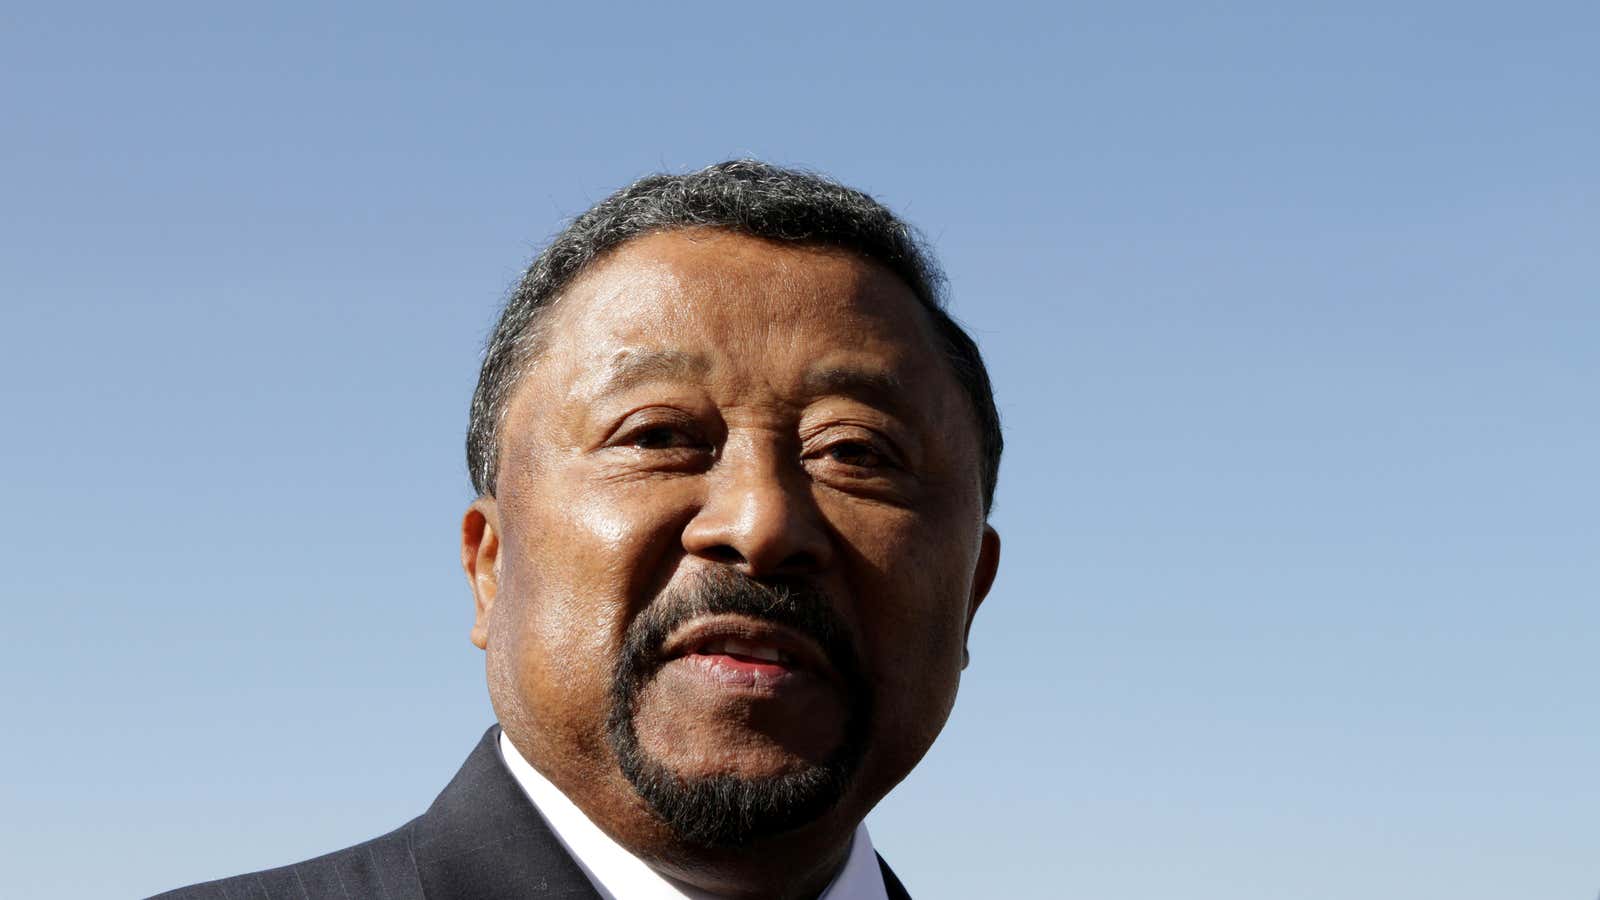 Jean Ping has contested the election results.